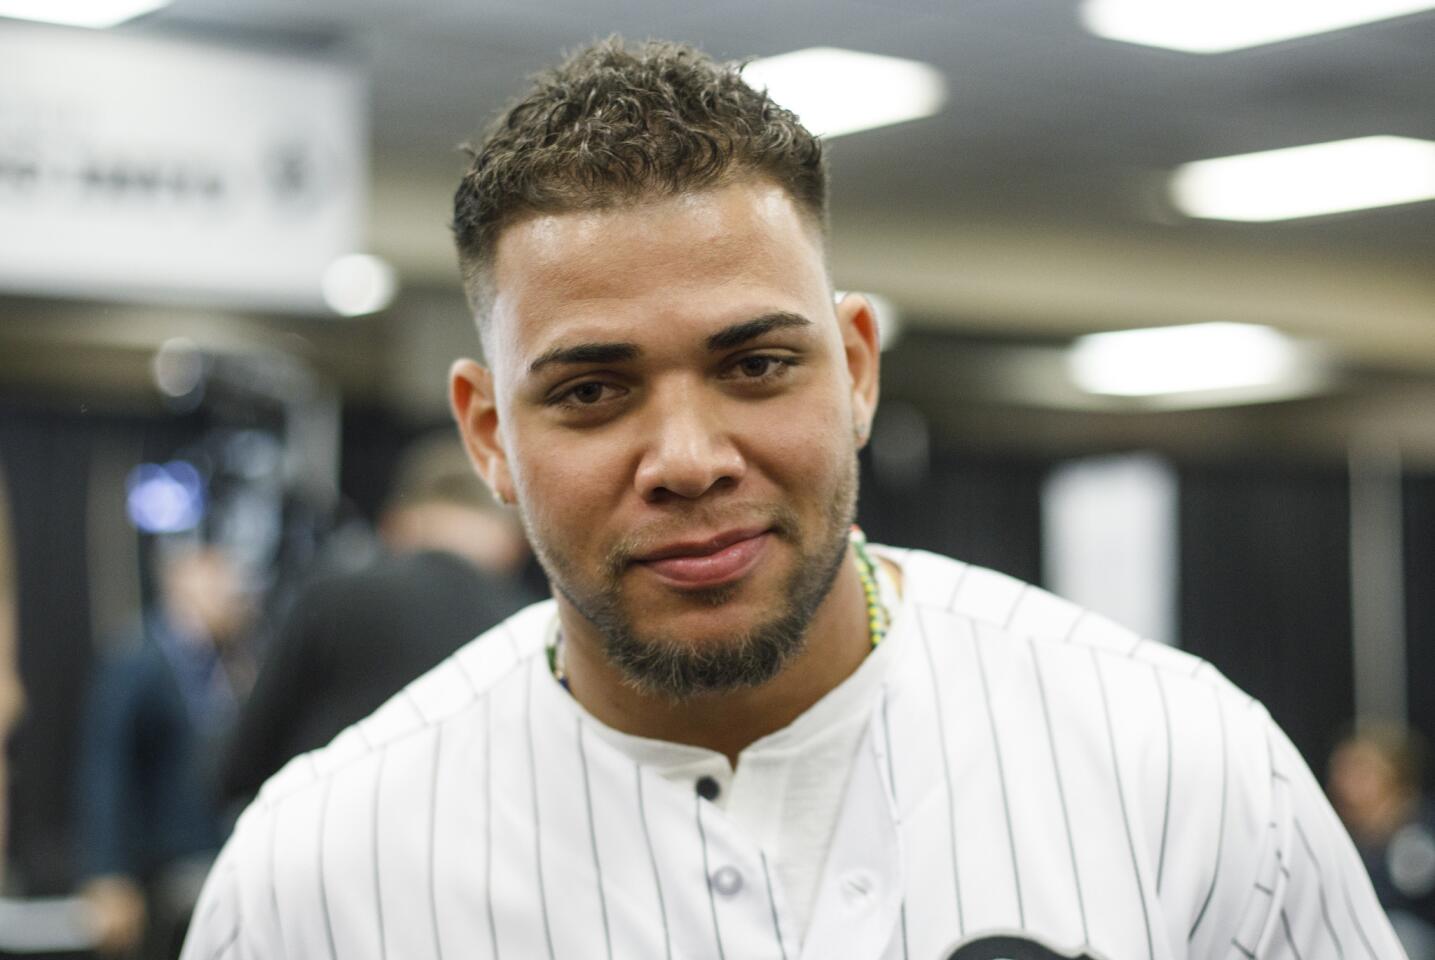 White Sox second baseman Yoan Moncada speaks with members of the media during SoxFest 2018 at the Hilton Chicago on Friday, Jan. 26, 2018.